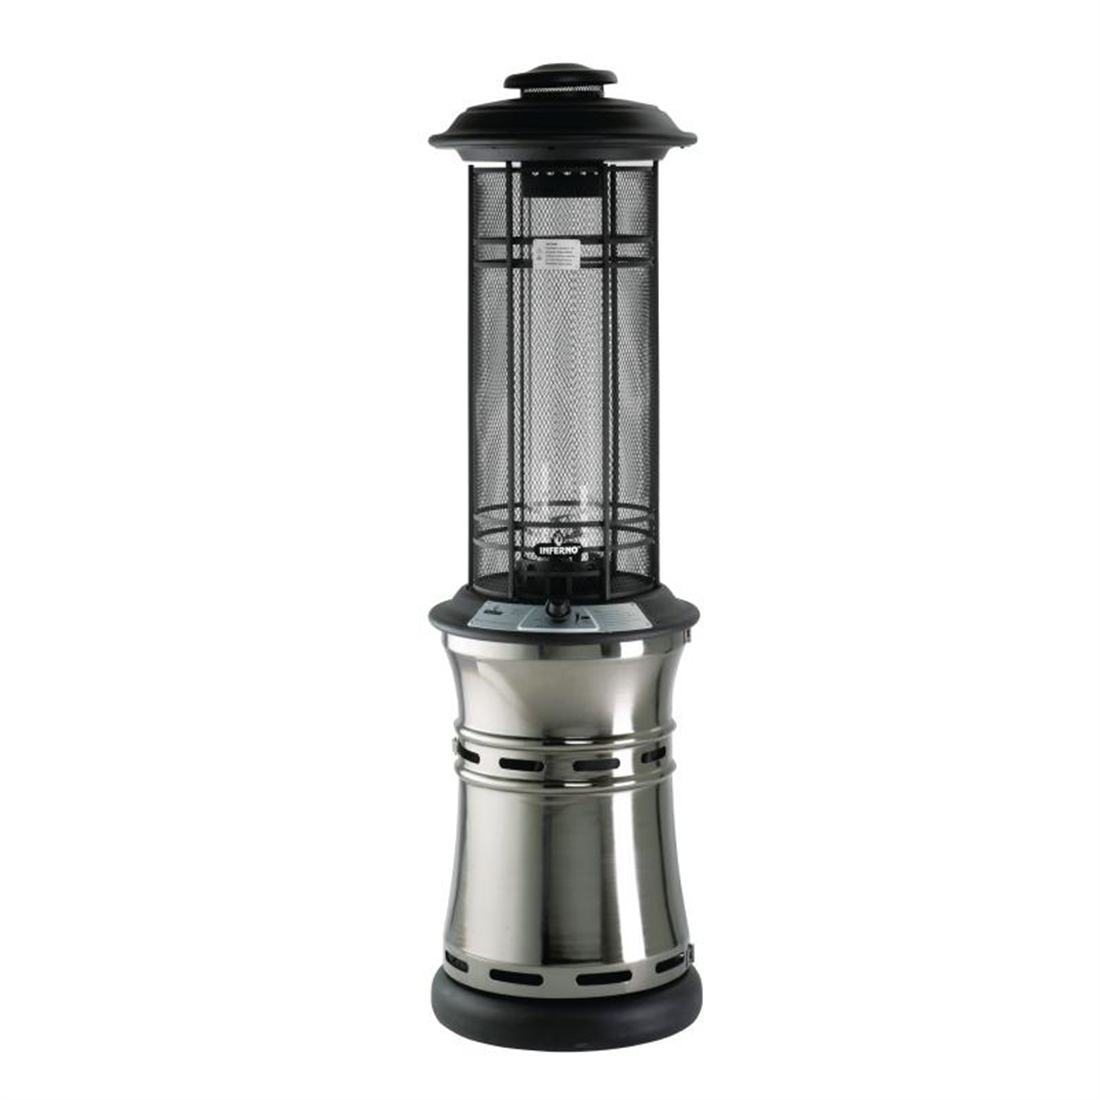 Lifestyle Inferno Flame Patio Heater 11kW